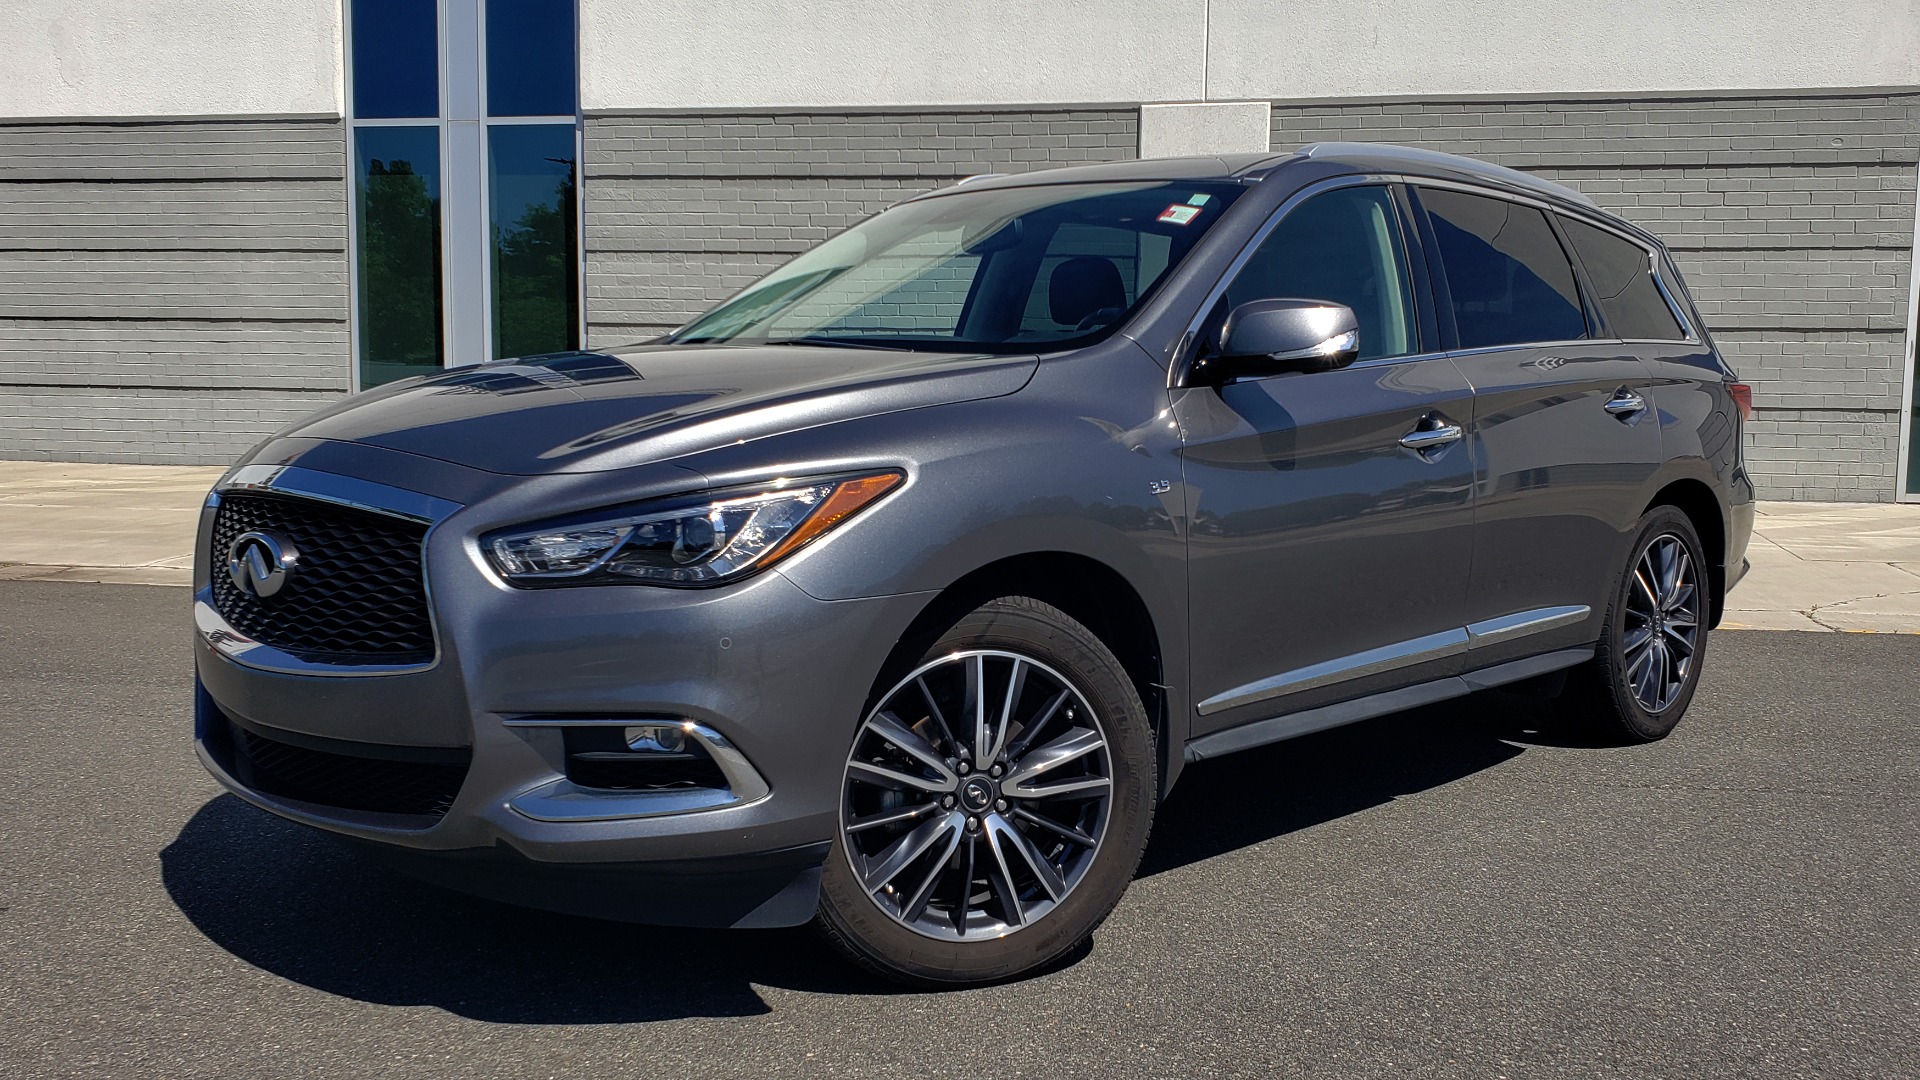 Used 2018 INFINITI QX60 3.5L V6 / FWD / CVT TRANS / NAV / SUNROOF / 3-ROWS / REARVIEW for sale Sold at Formula Imports in Charlotte NC 28227 1